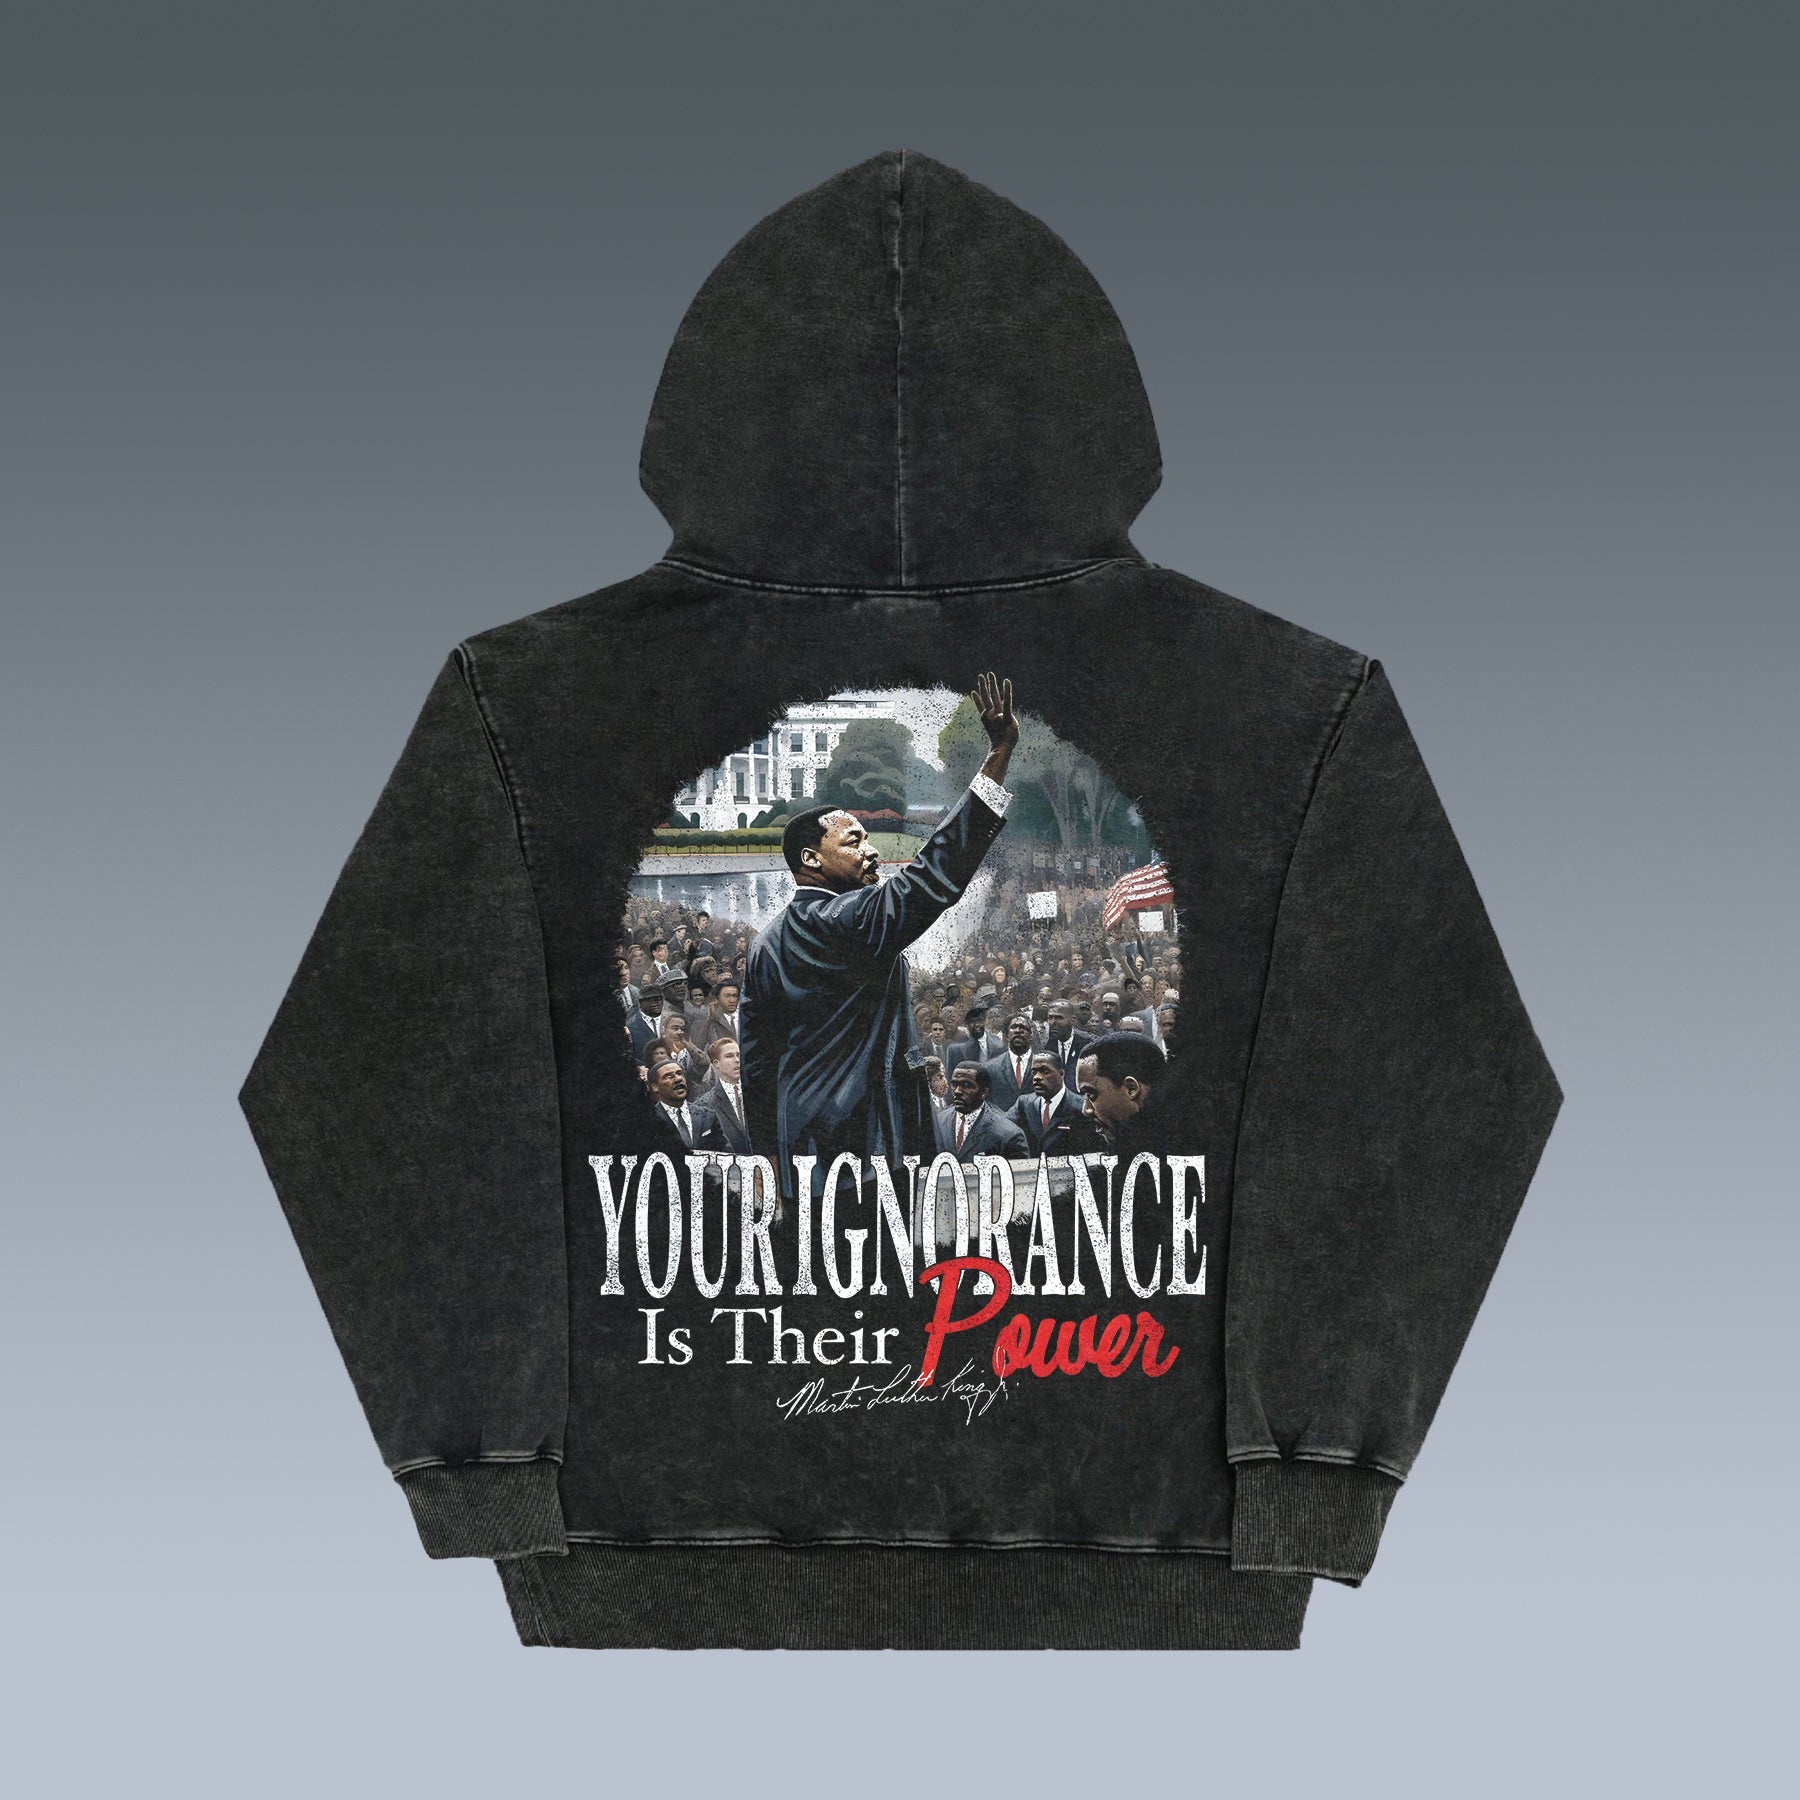 VINTAGE HOODIES | MARTIN LUTHER KING